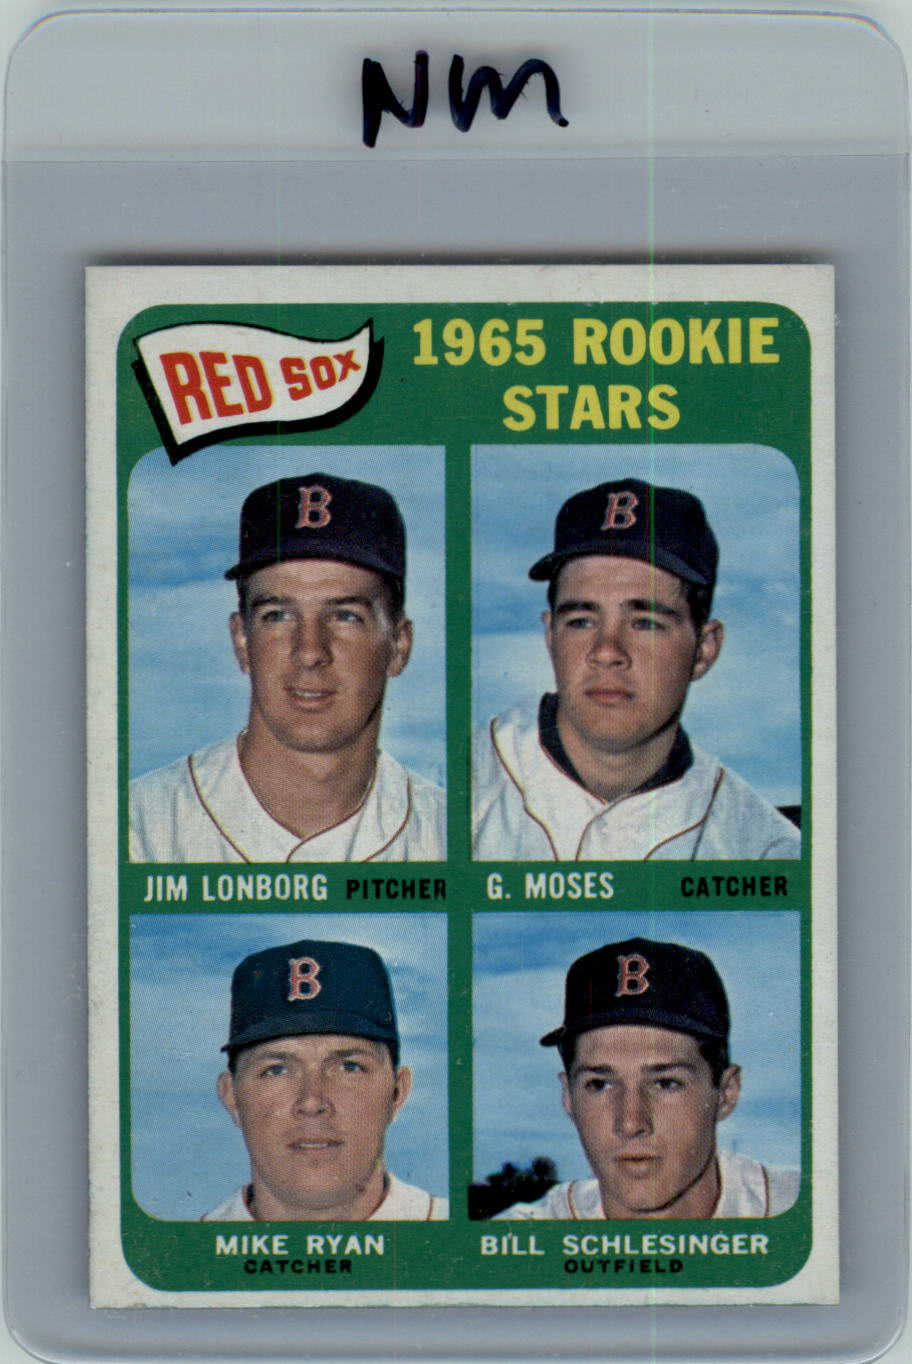 1965 Topps #573 Rookie Stars/Jim Lonborg RC/Gerry Moses RC/Bill Schlesinger RC/Mike Ryan RC SP